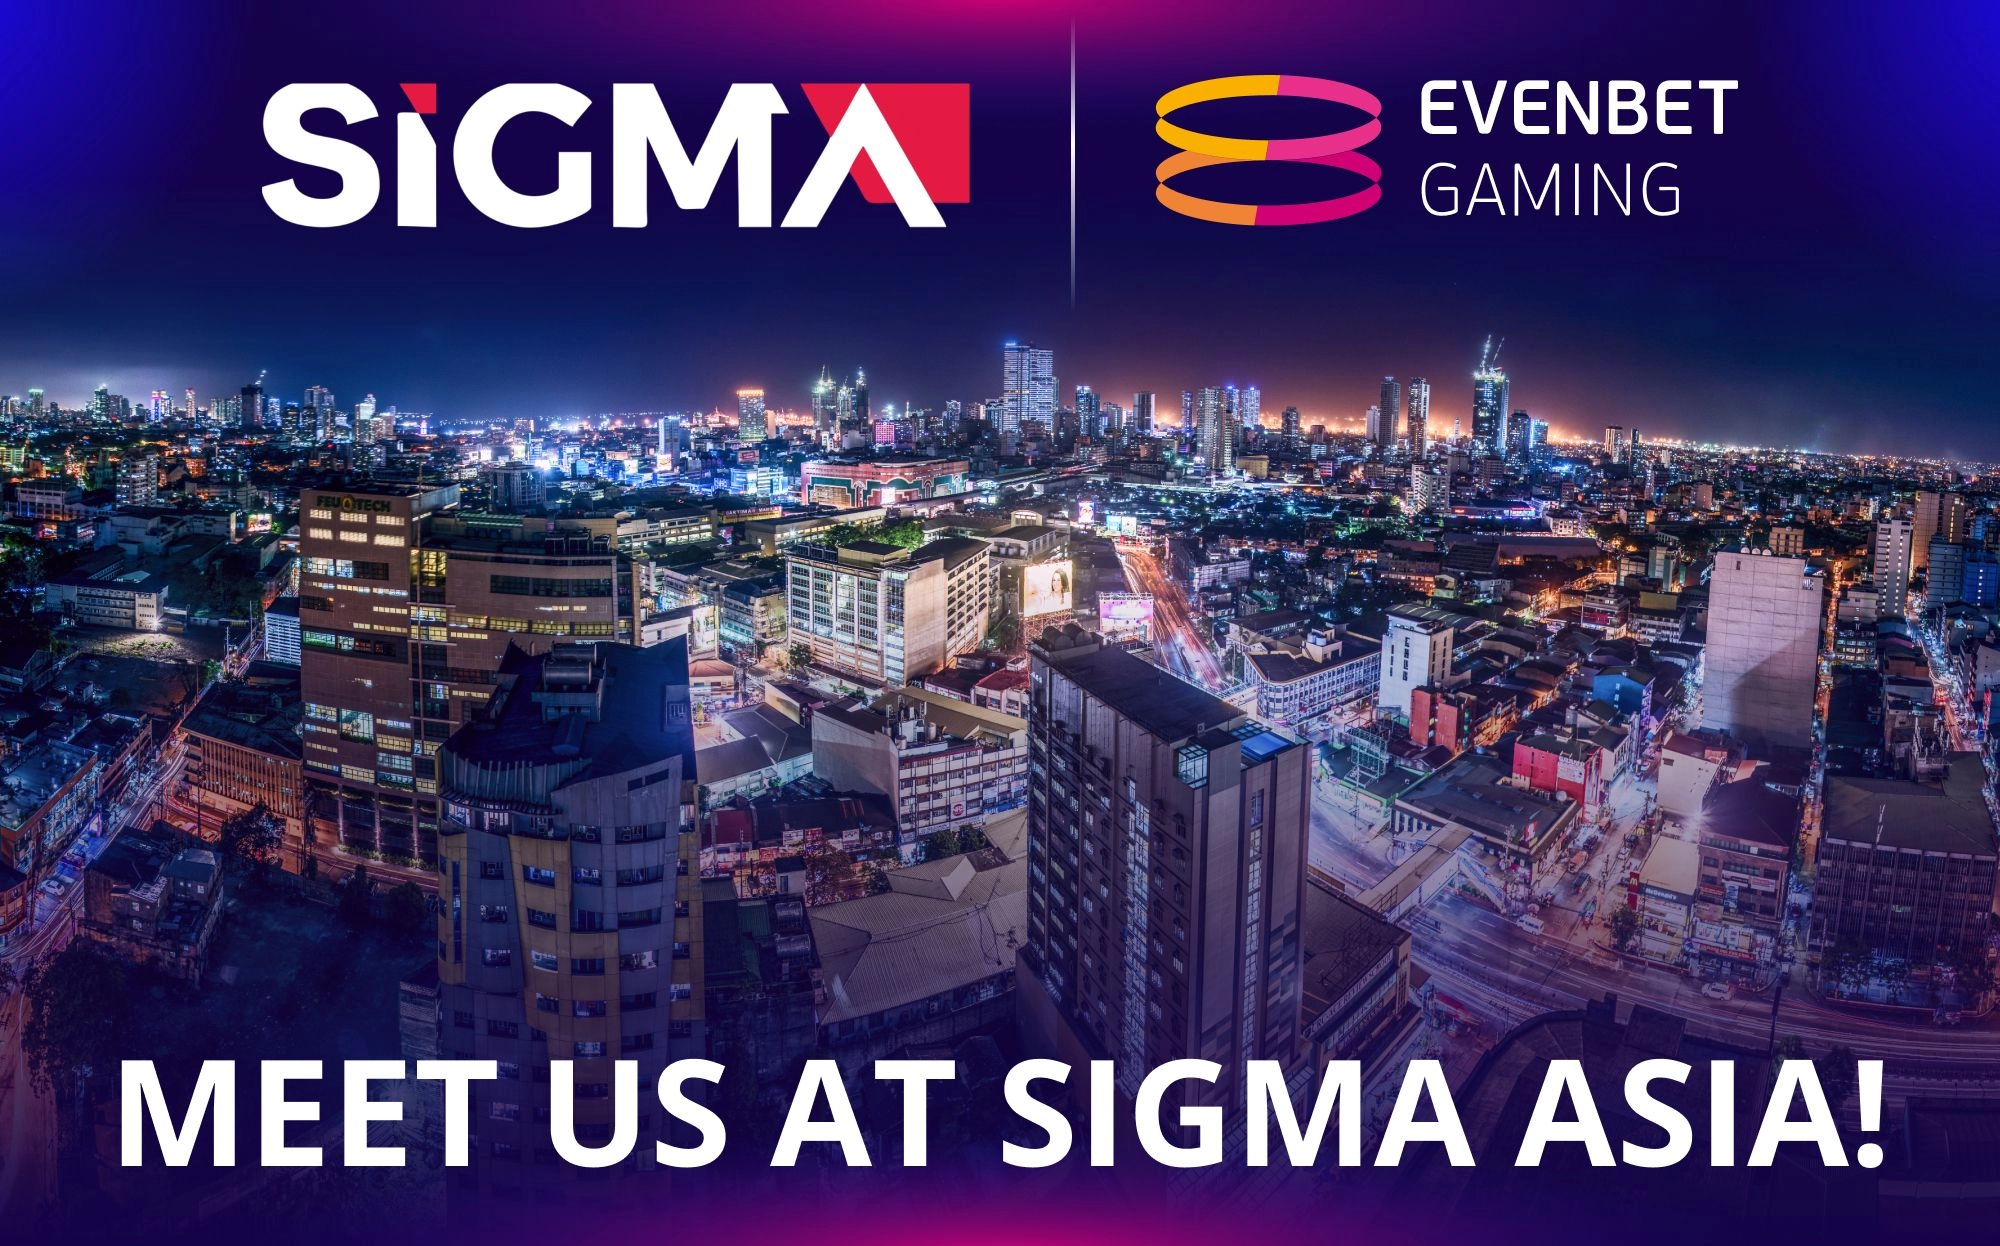 EvenBet is Exhibiting at SiGMA Asia, July 19-22